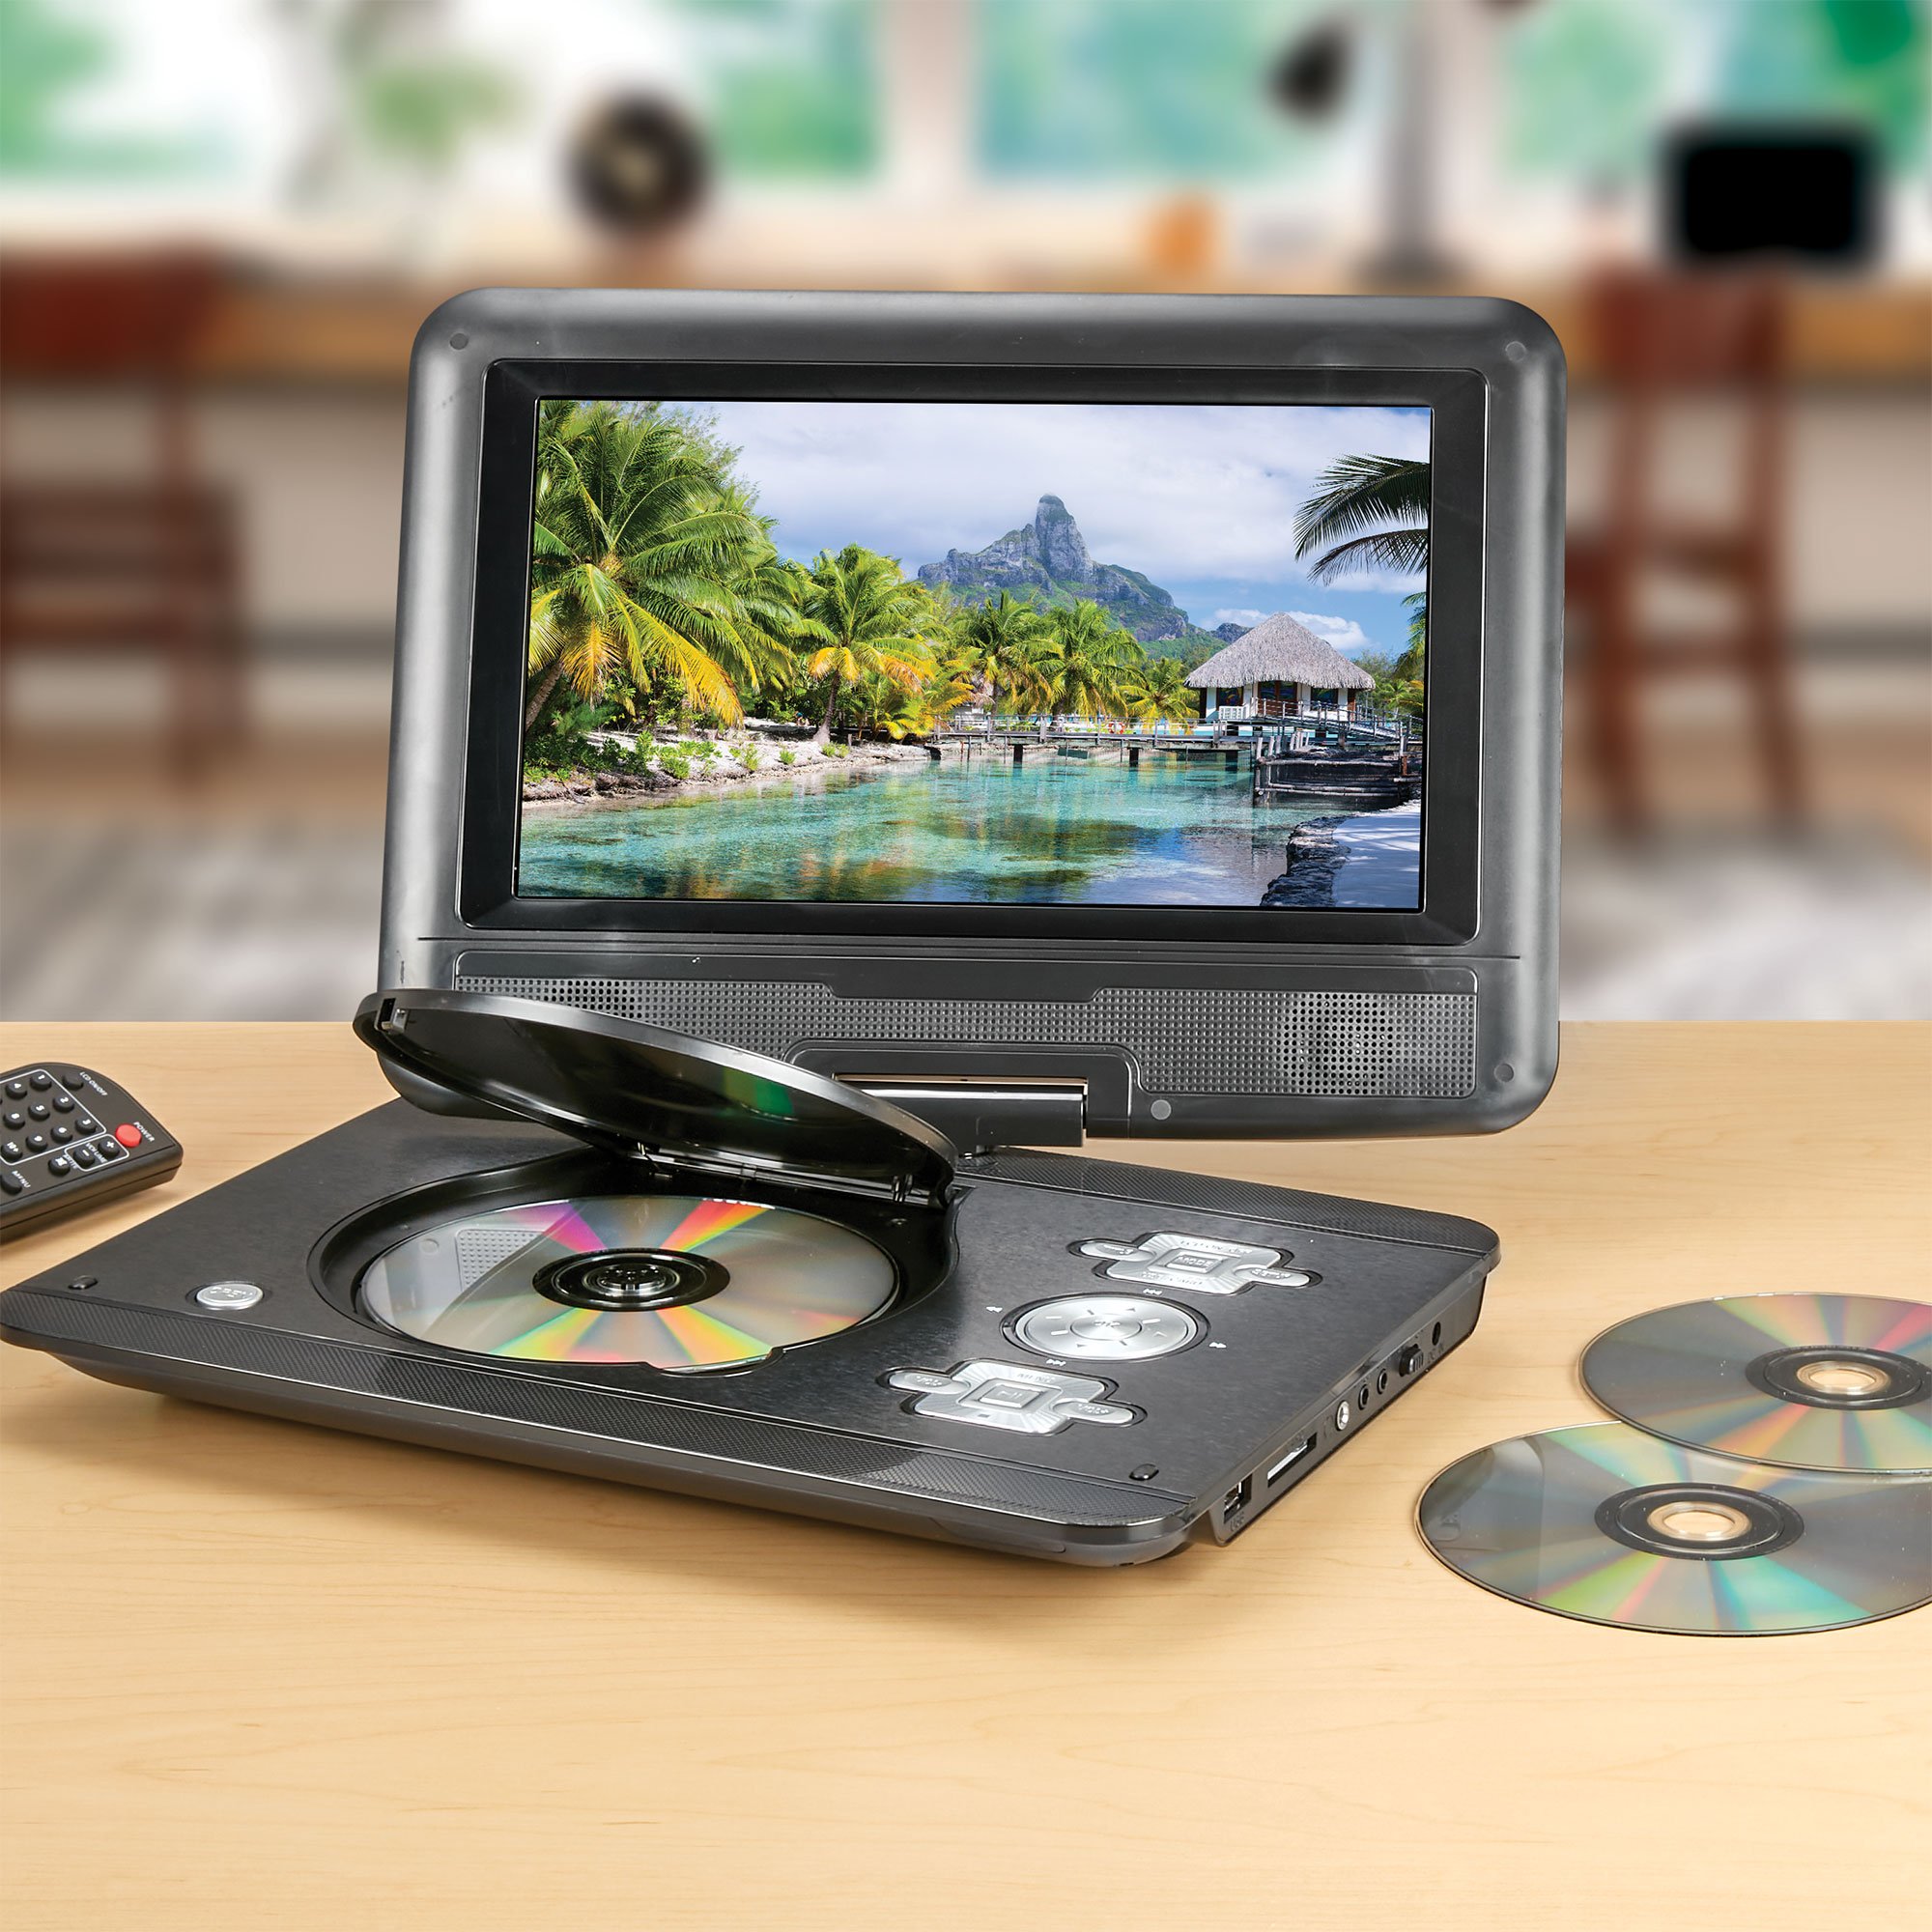 Proscan Portable DVD Player with 10-in Display